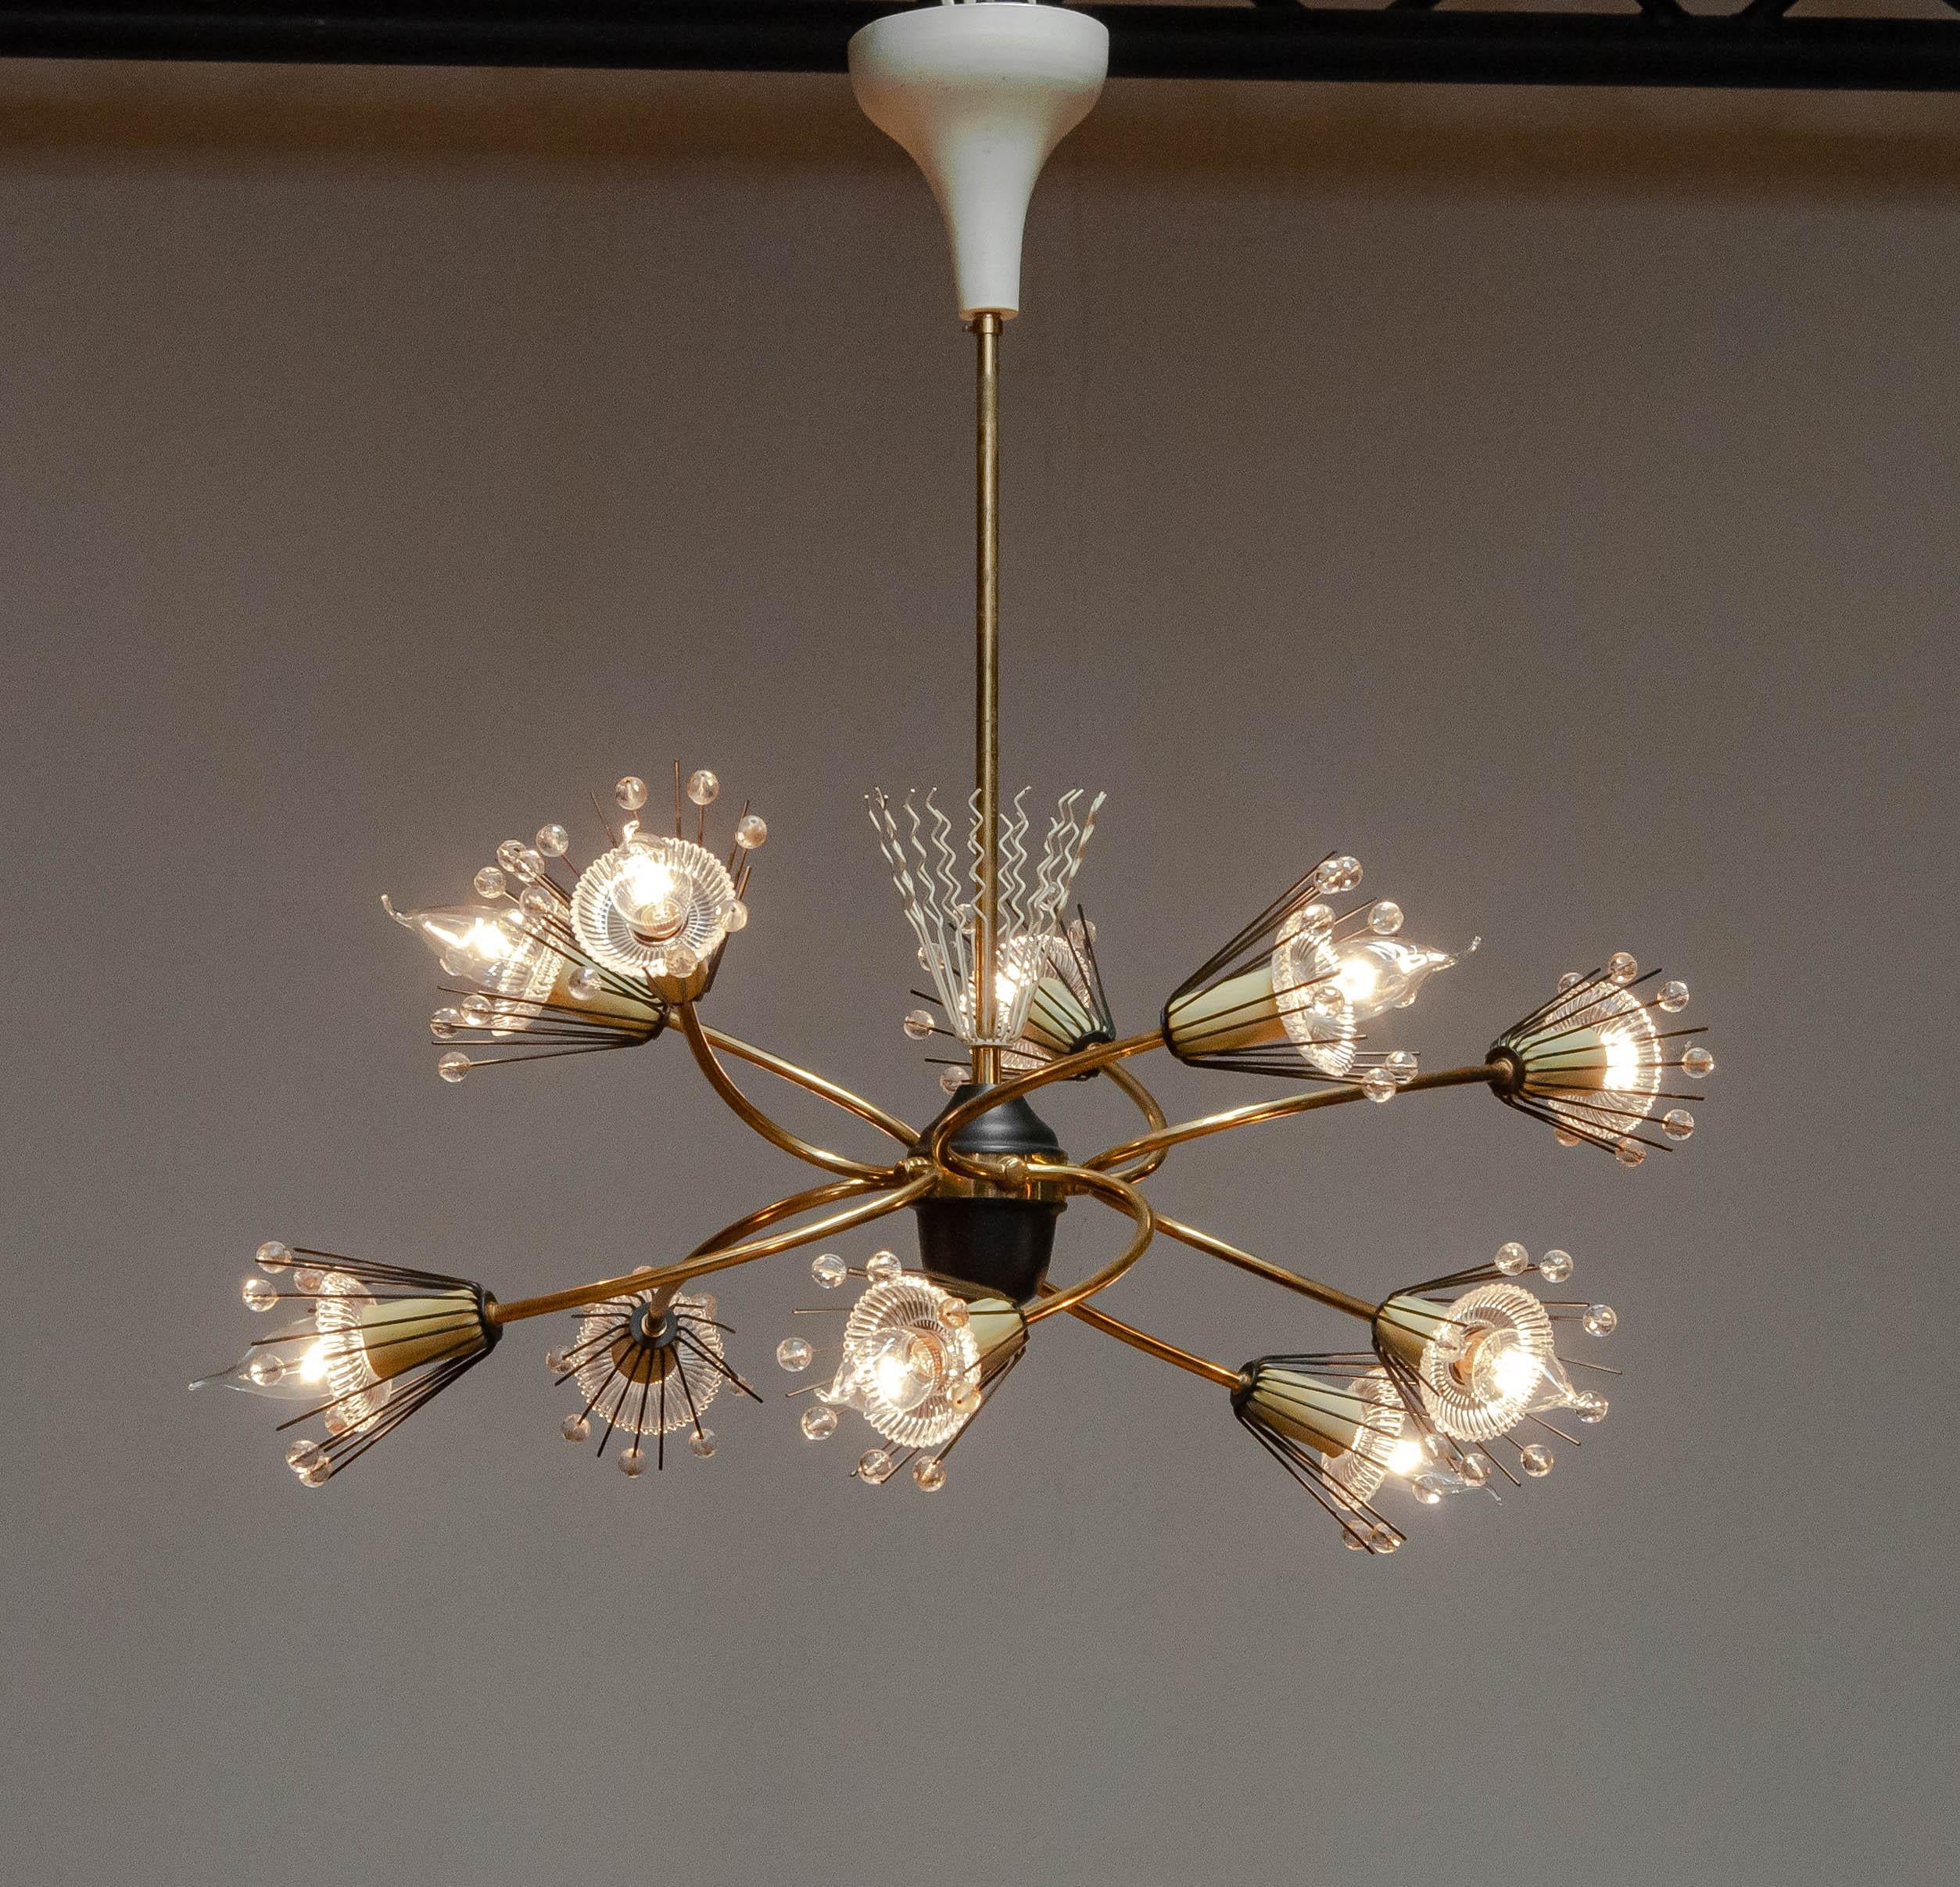 Beautiful 1950s brass with black lacquered details 'Snowflakes' or 'Pyra' chandelier designed by Emil Stejnar for Rupert Nikoll in Vienna Austria. This example has ten arms is is in complete condition meaning that all ten art glass dishes ( behind